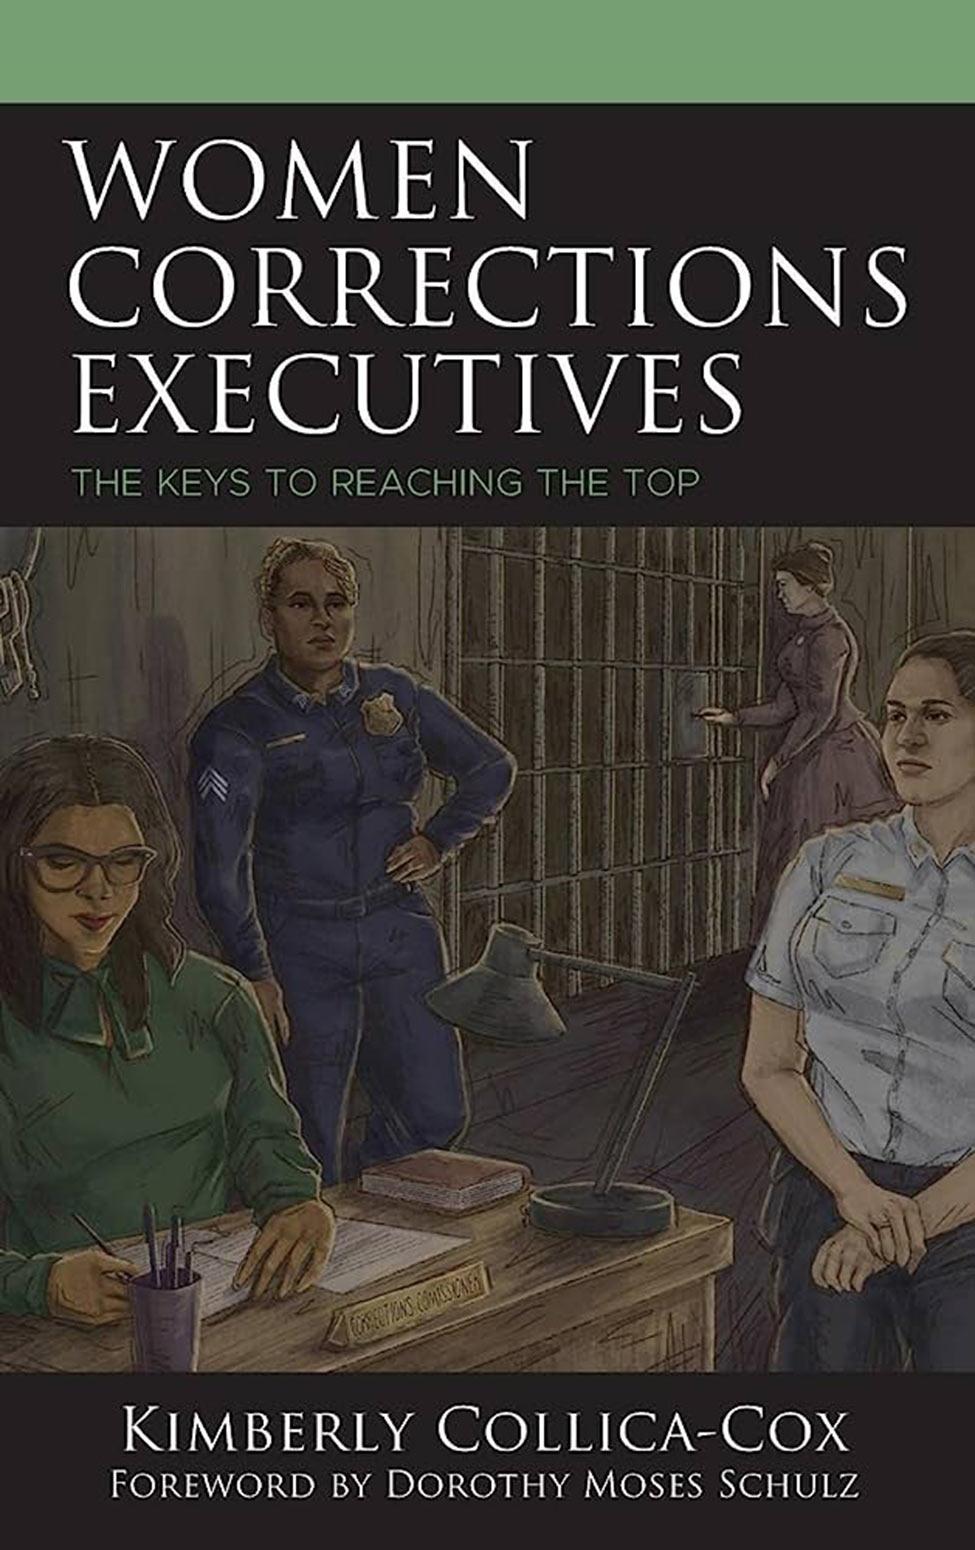 Book cover of Women Corrections Executives by Kimberly Collica-Cox